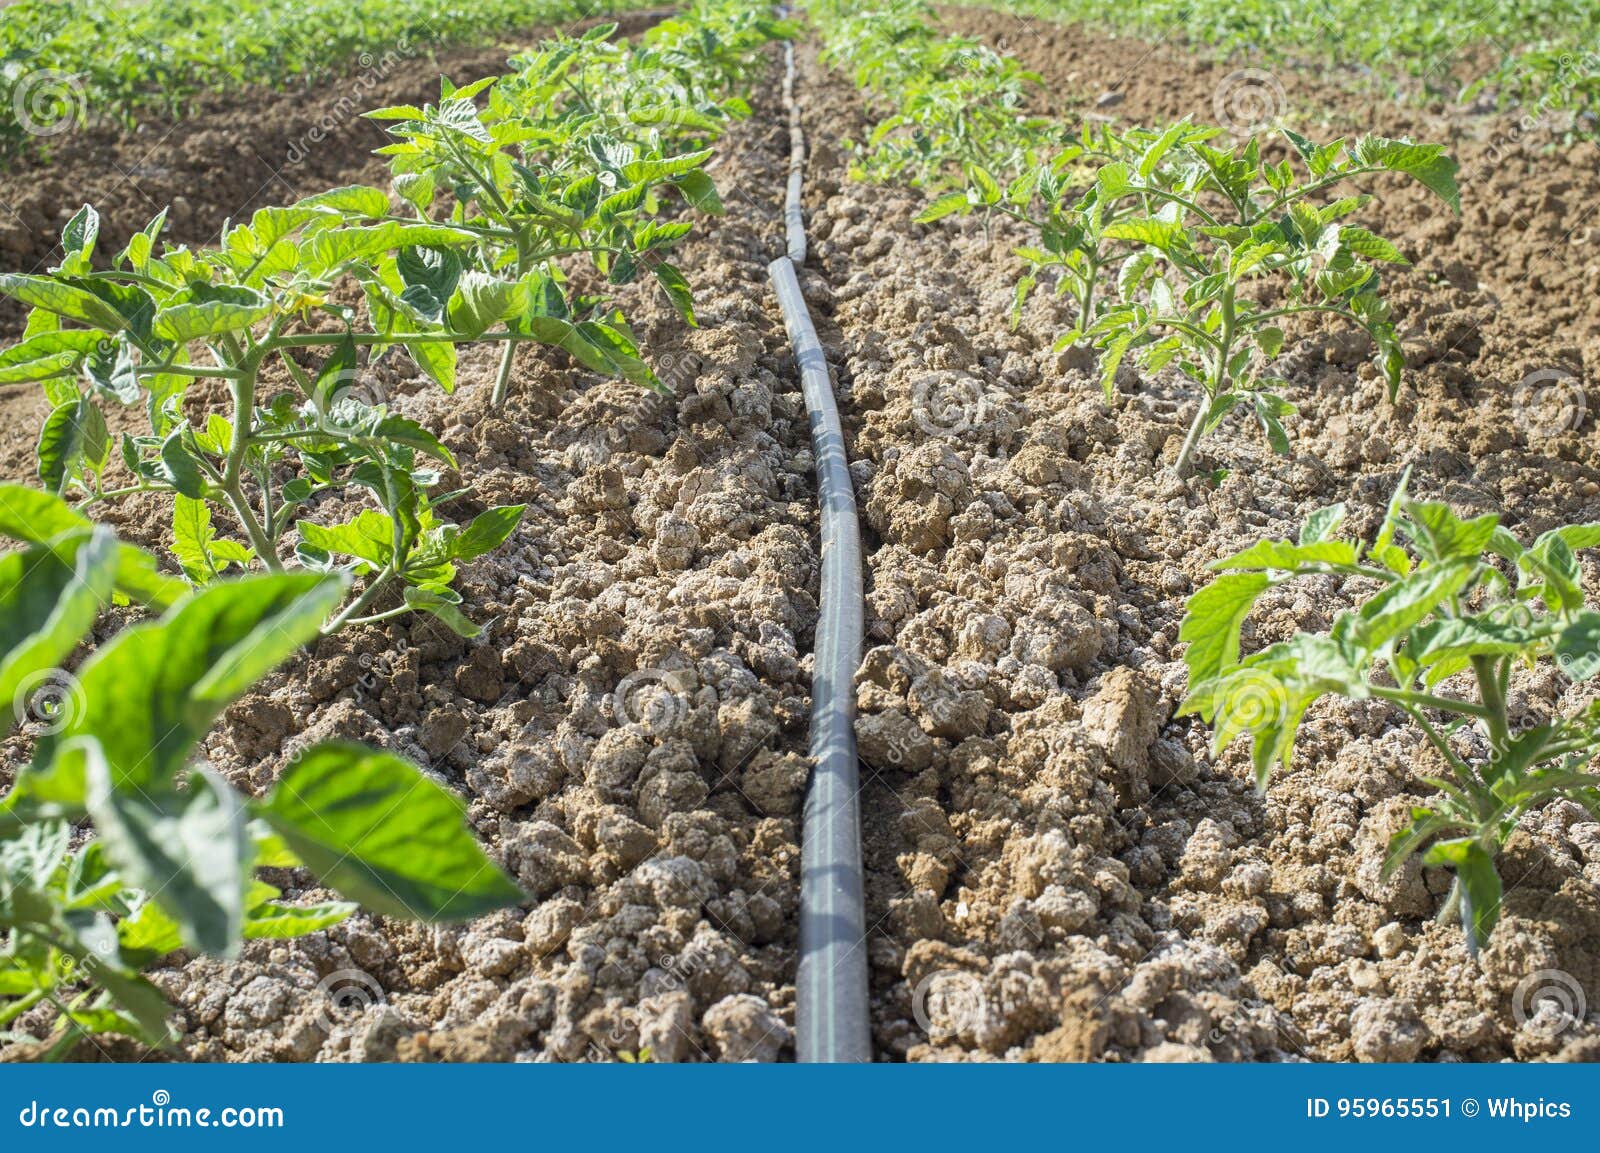 young tomato plants drip irrigation system. ground level view